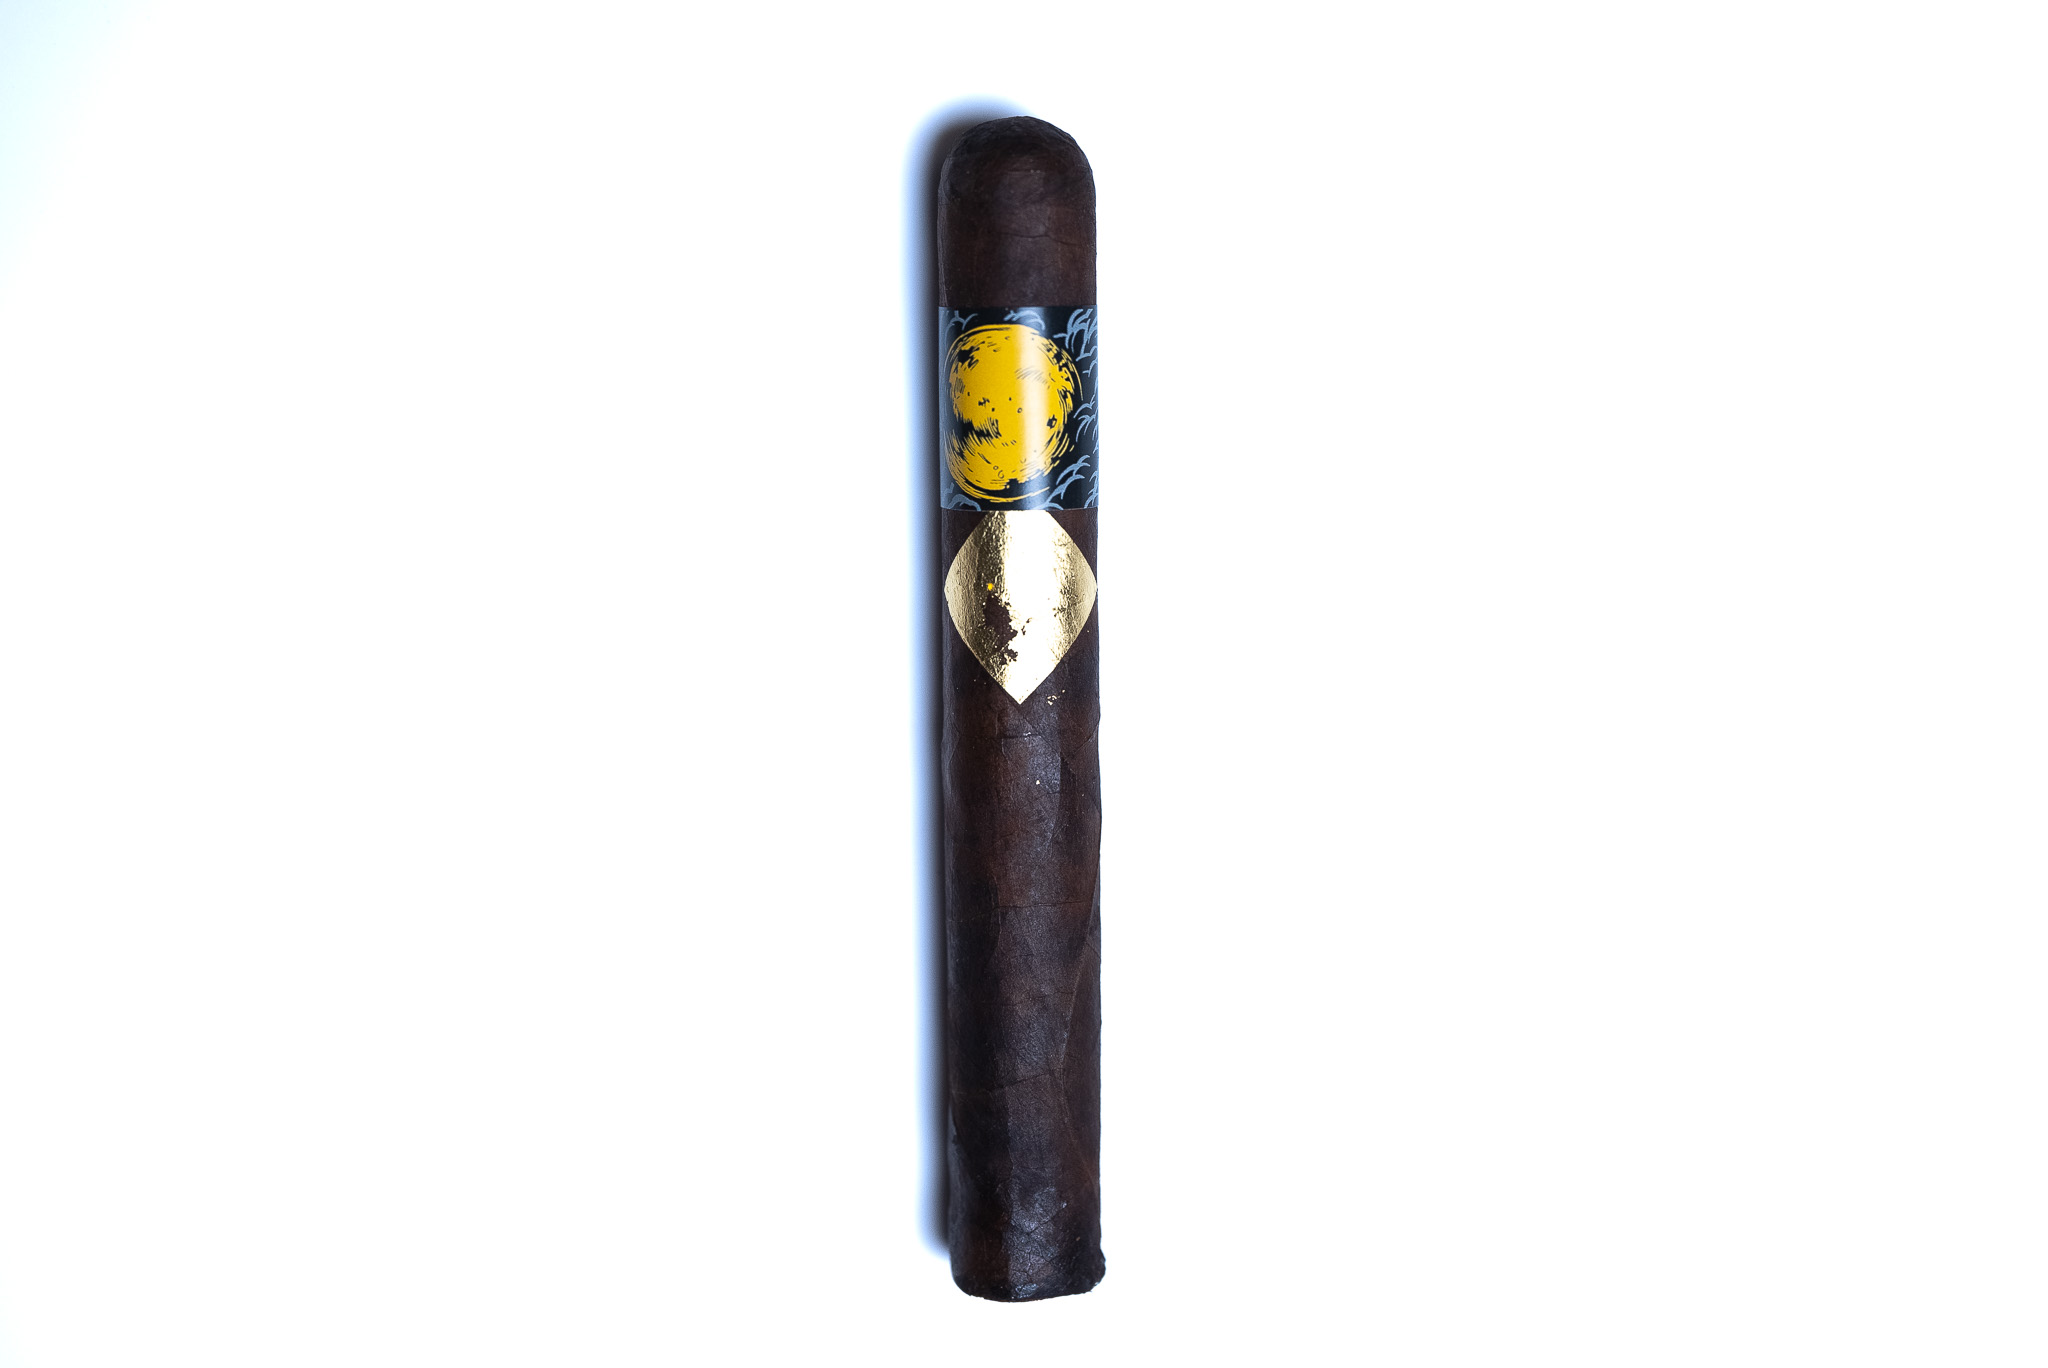 The Full Moon By Cavalier Cigars